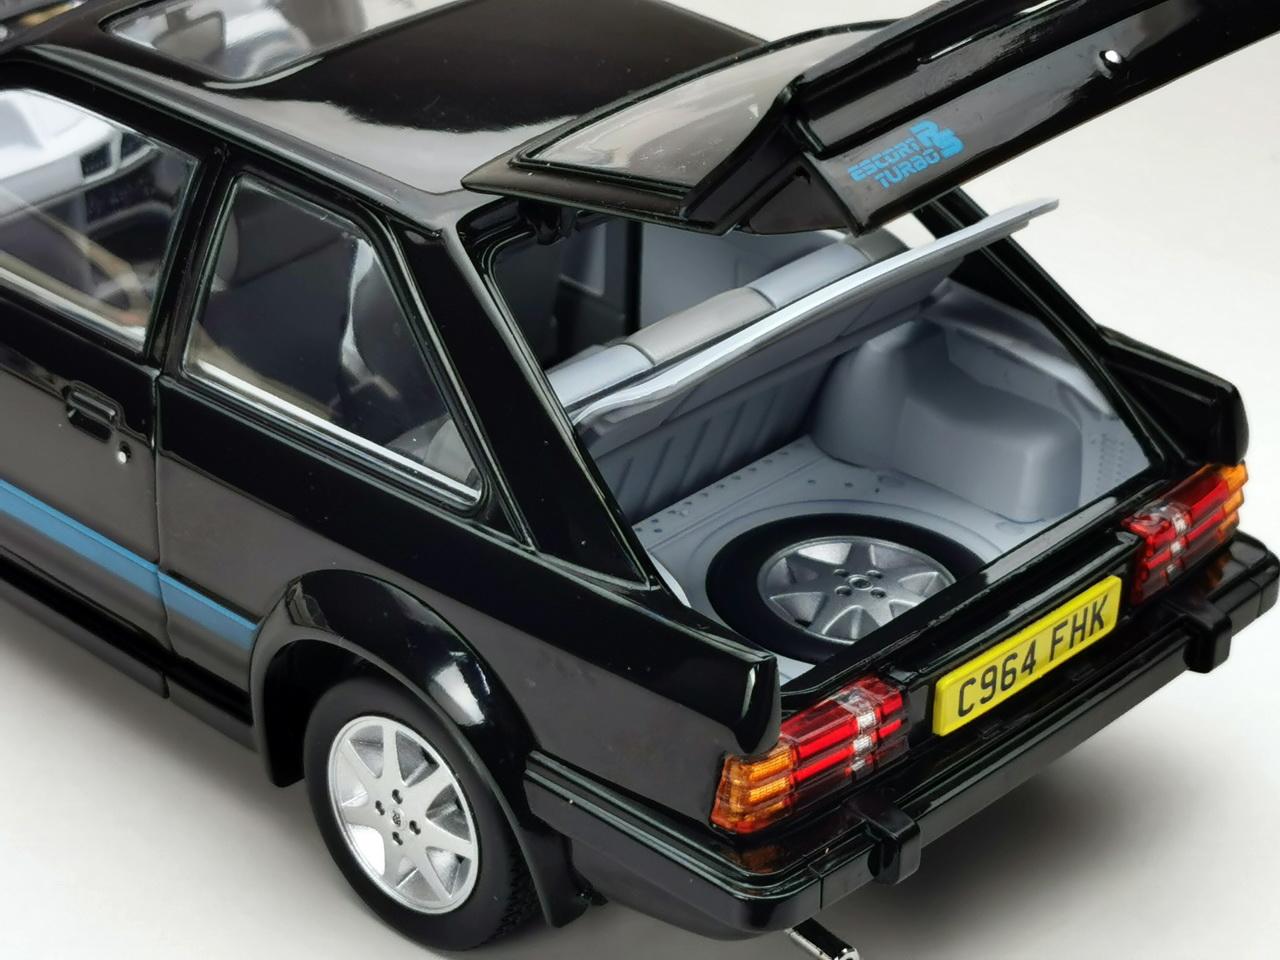 An excellent representation of the Ford Escort RS Turbo from 198